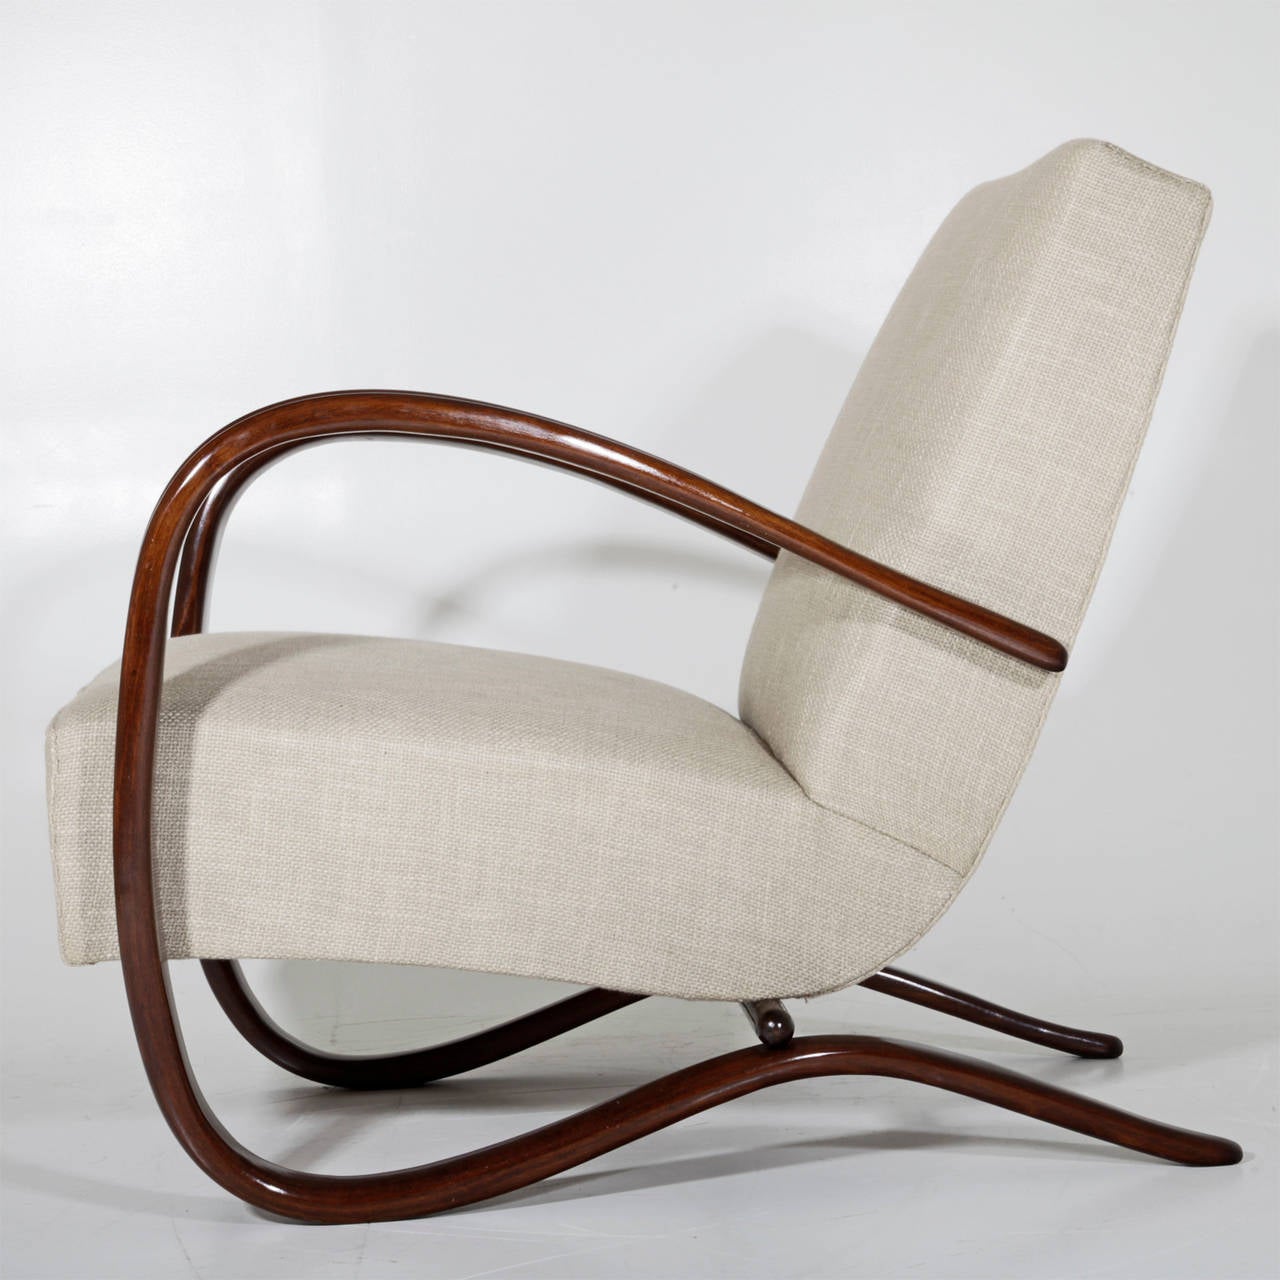 Fantastic pair Lounge chairs by Jindrich Halabala from the 1930's.
Very dynamic chairs with a curved base that ends fluently in the armrests.
New beige structure upholstery fabric, new upholstery.
Signed with Thonet logo.
Model H269.